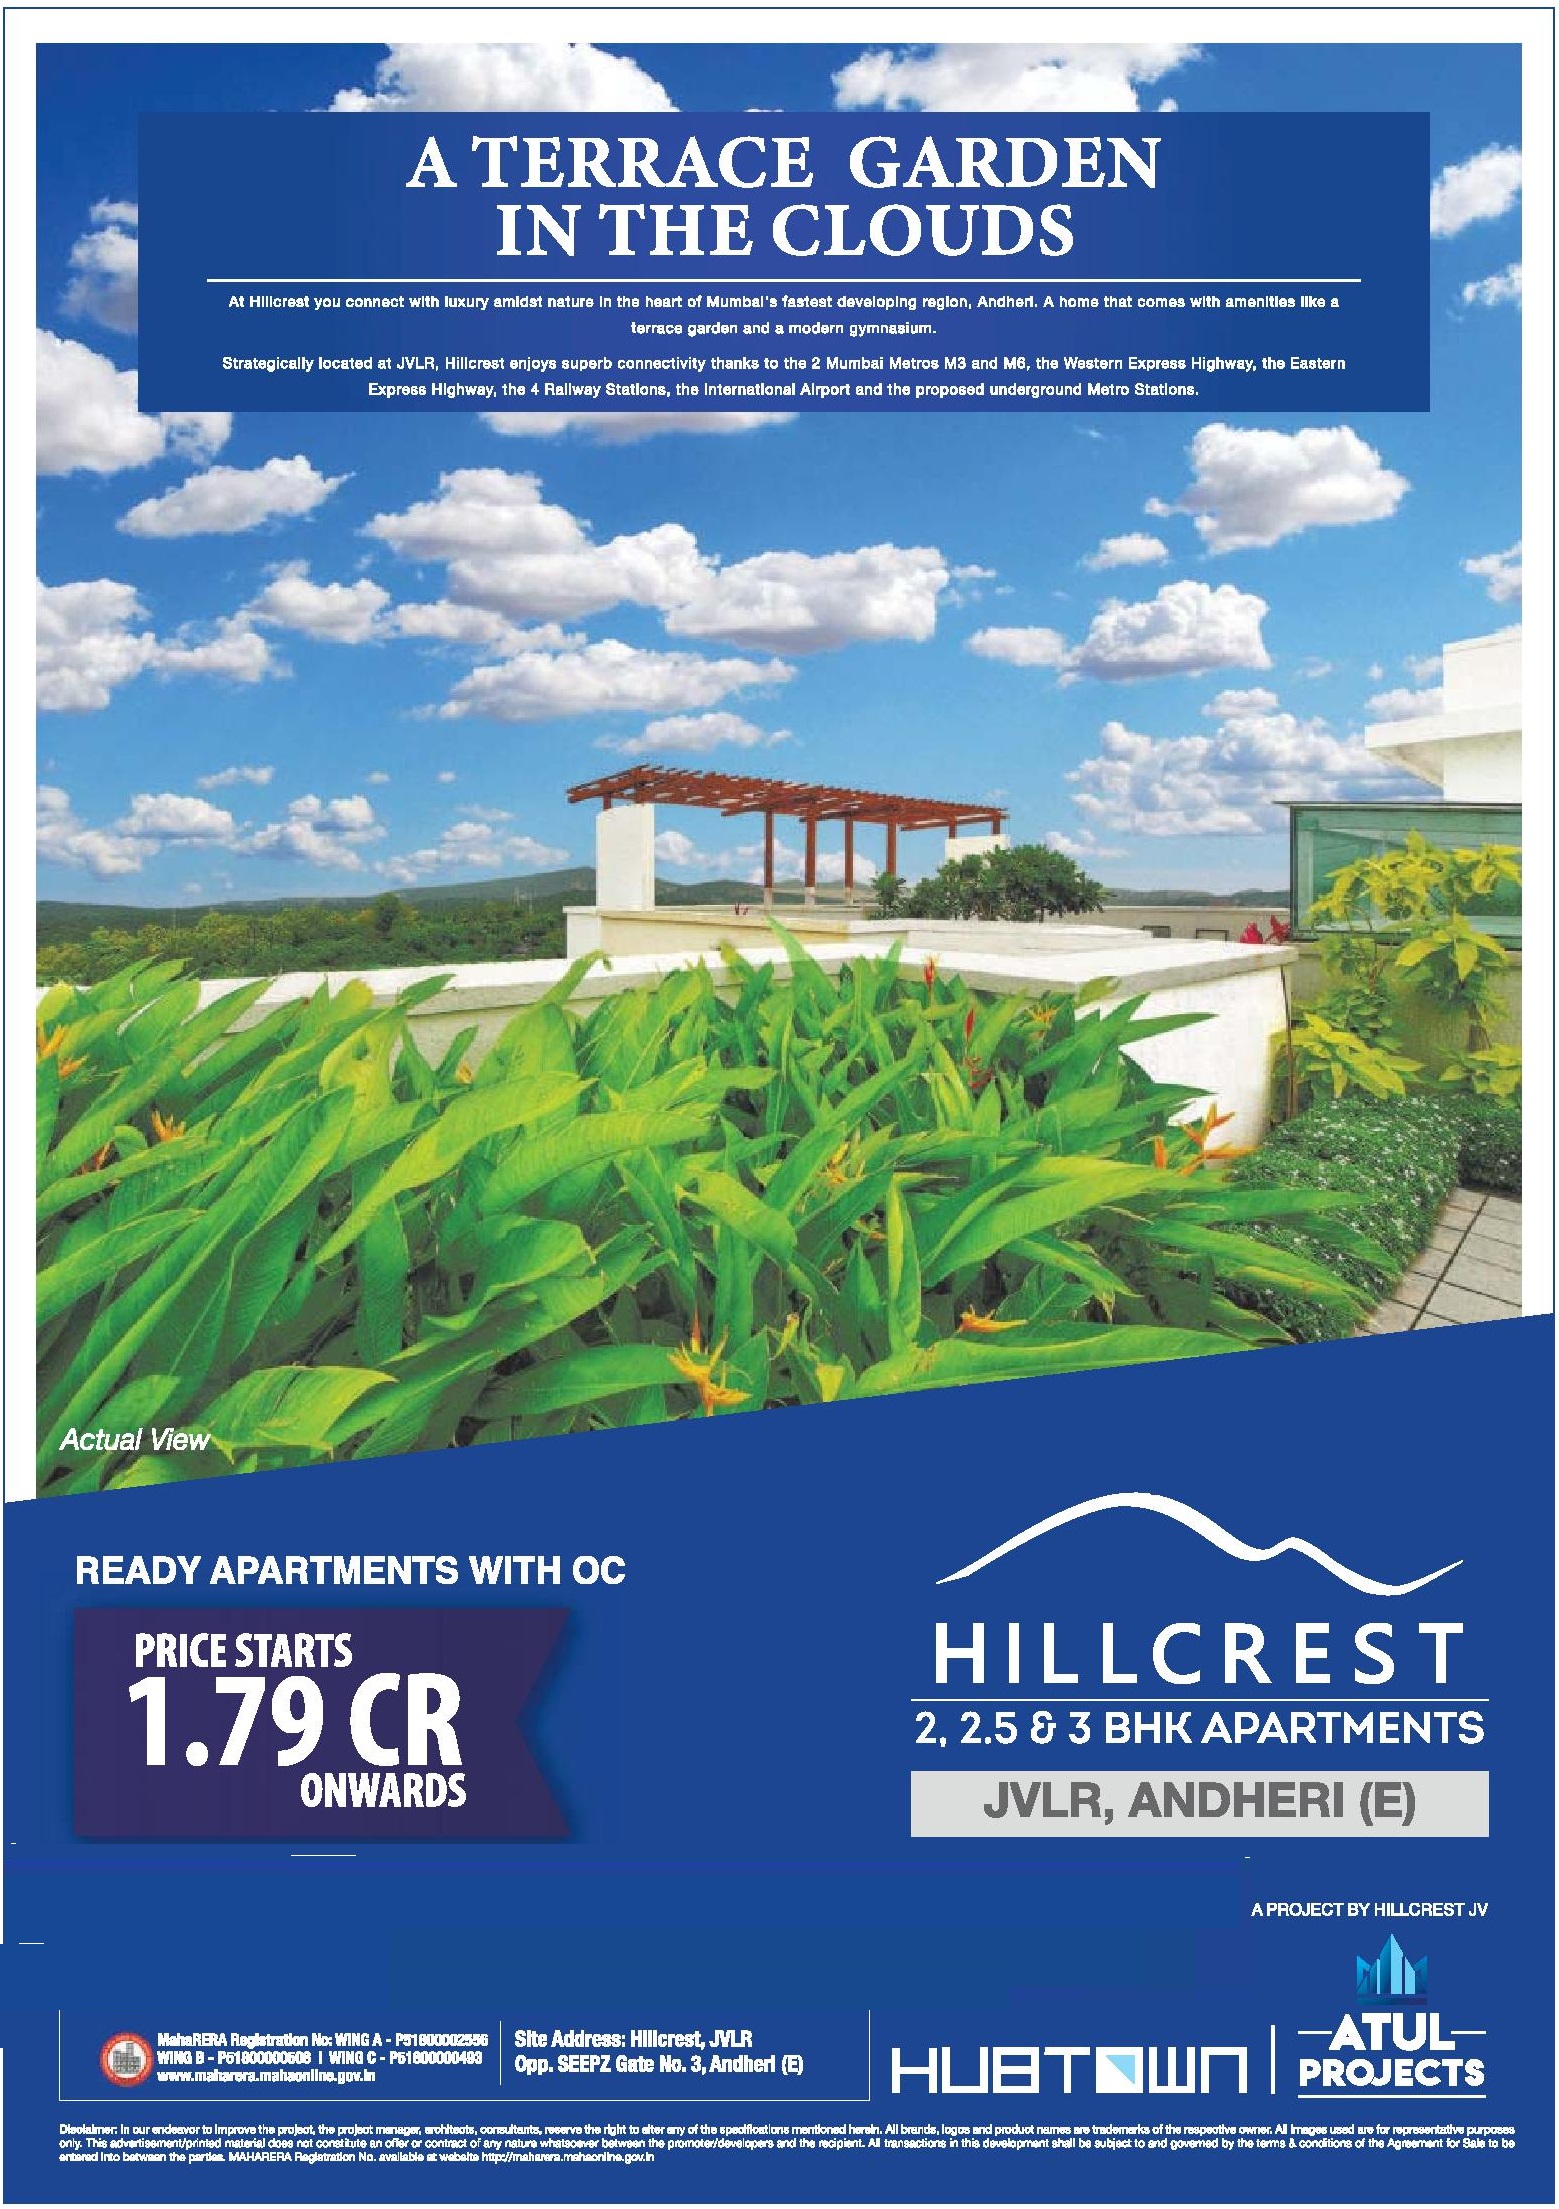 Book ready apartments with OC at Hubtown Hillcrest in Mumbai